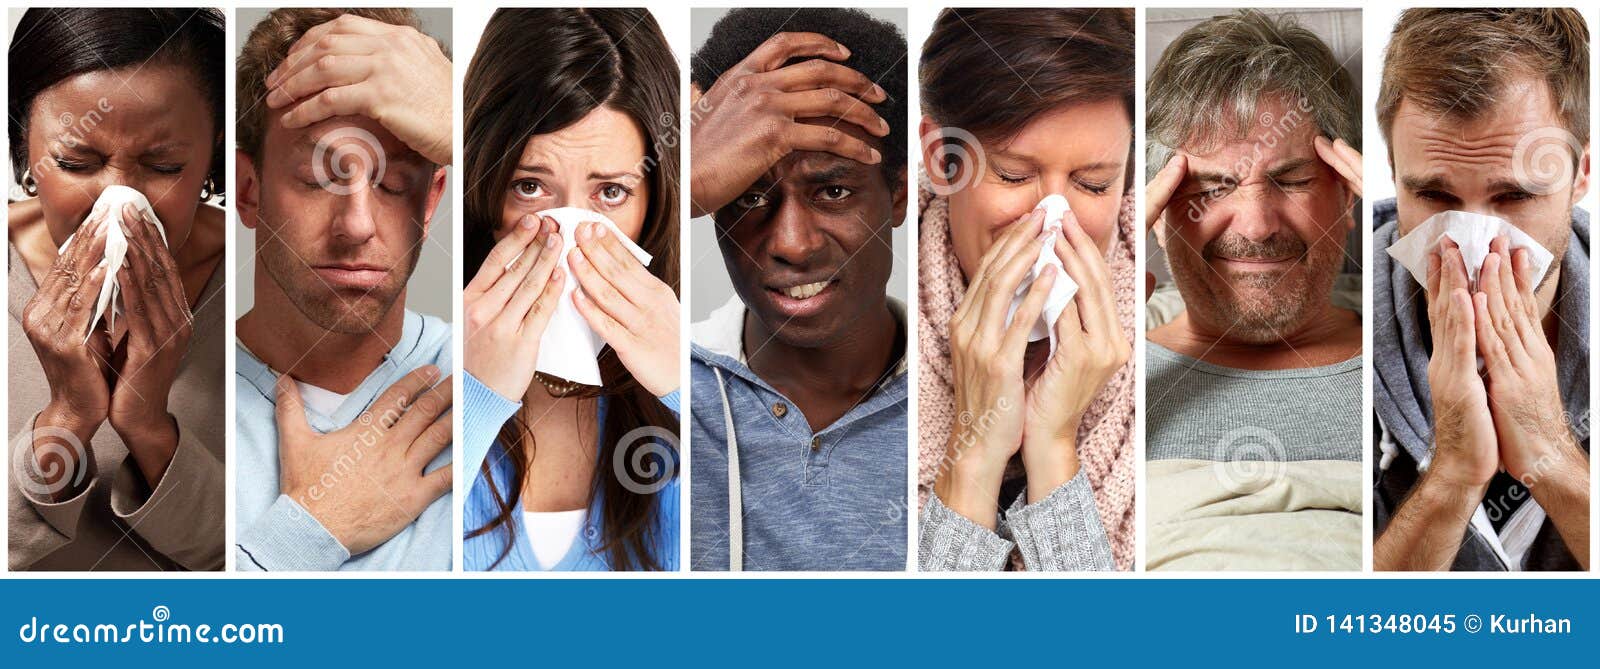 sick people having flu, cold and sneeze